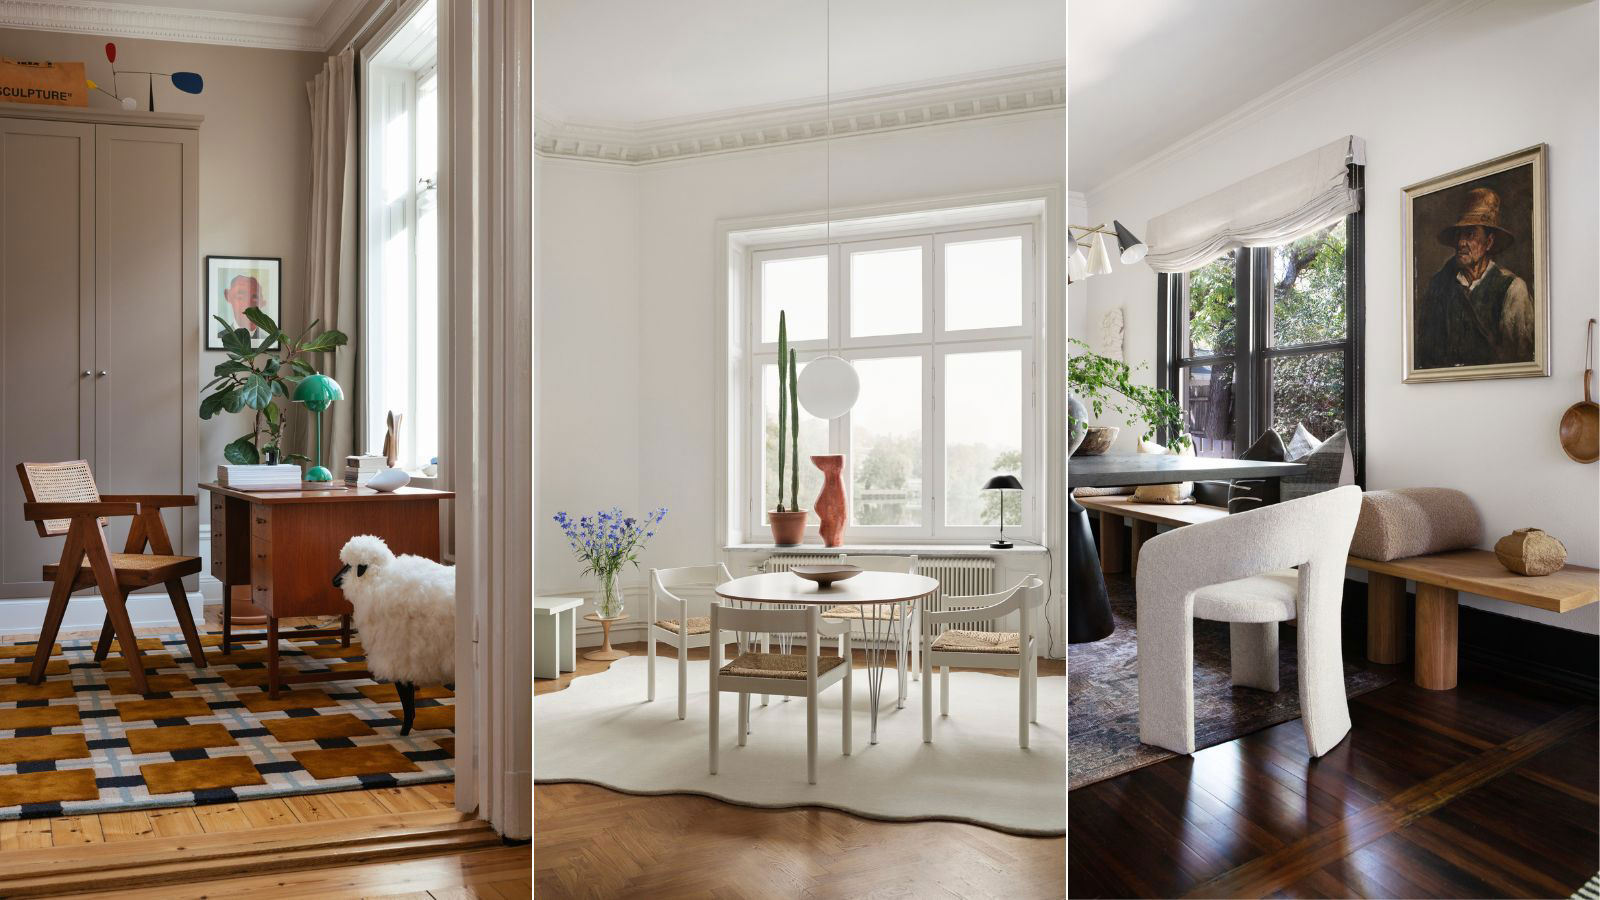 Modern European style is the laid-back aesthetic we all want to achieve ...